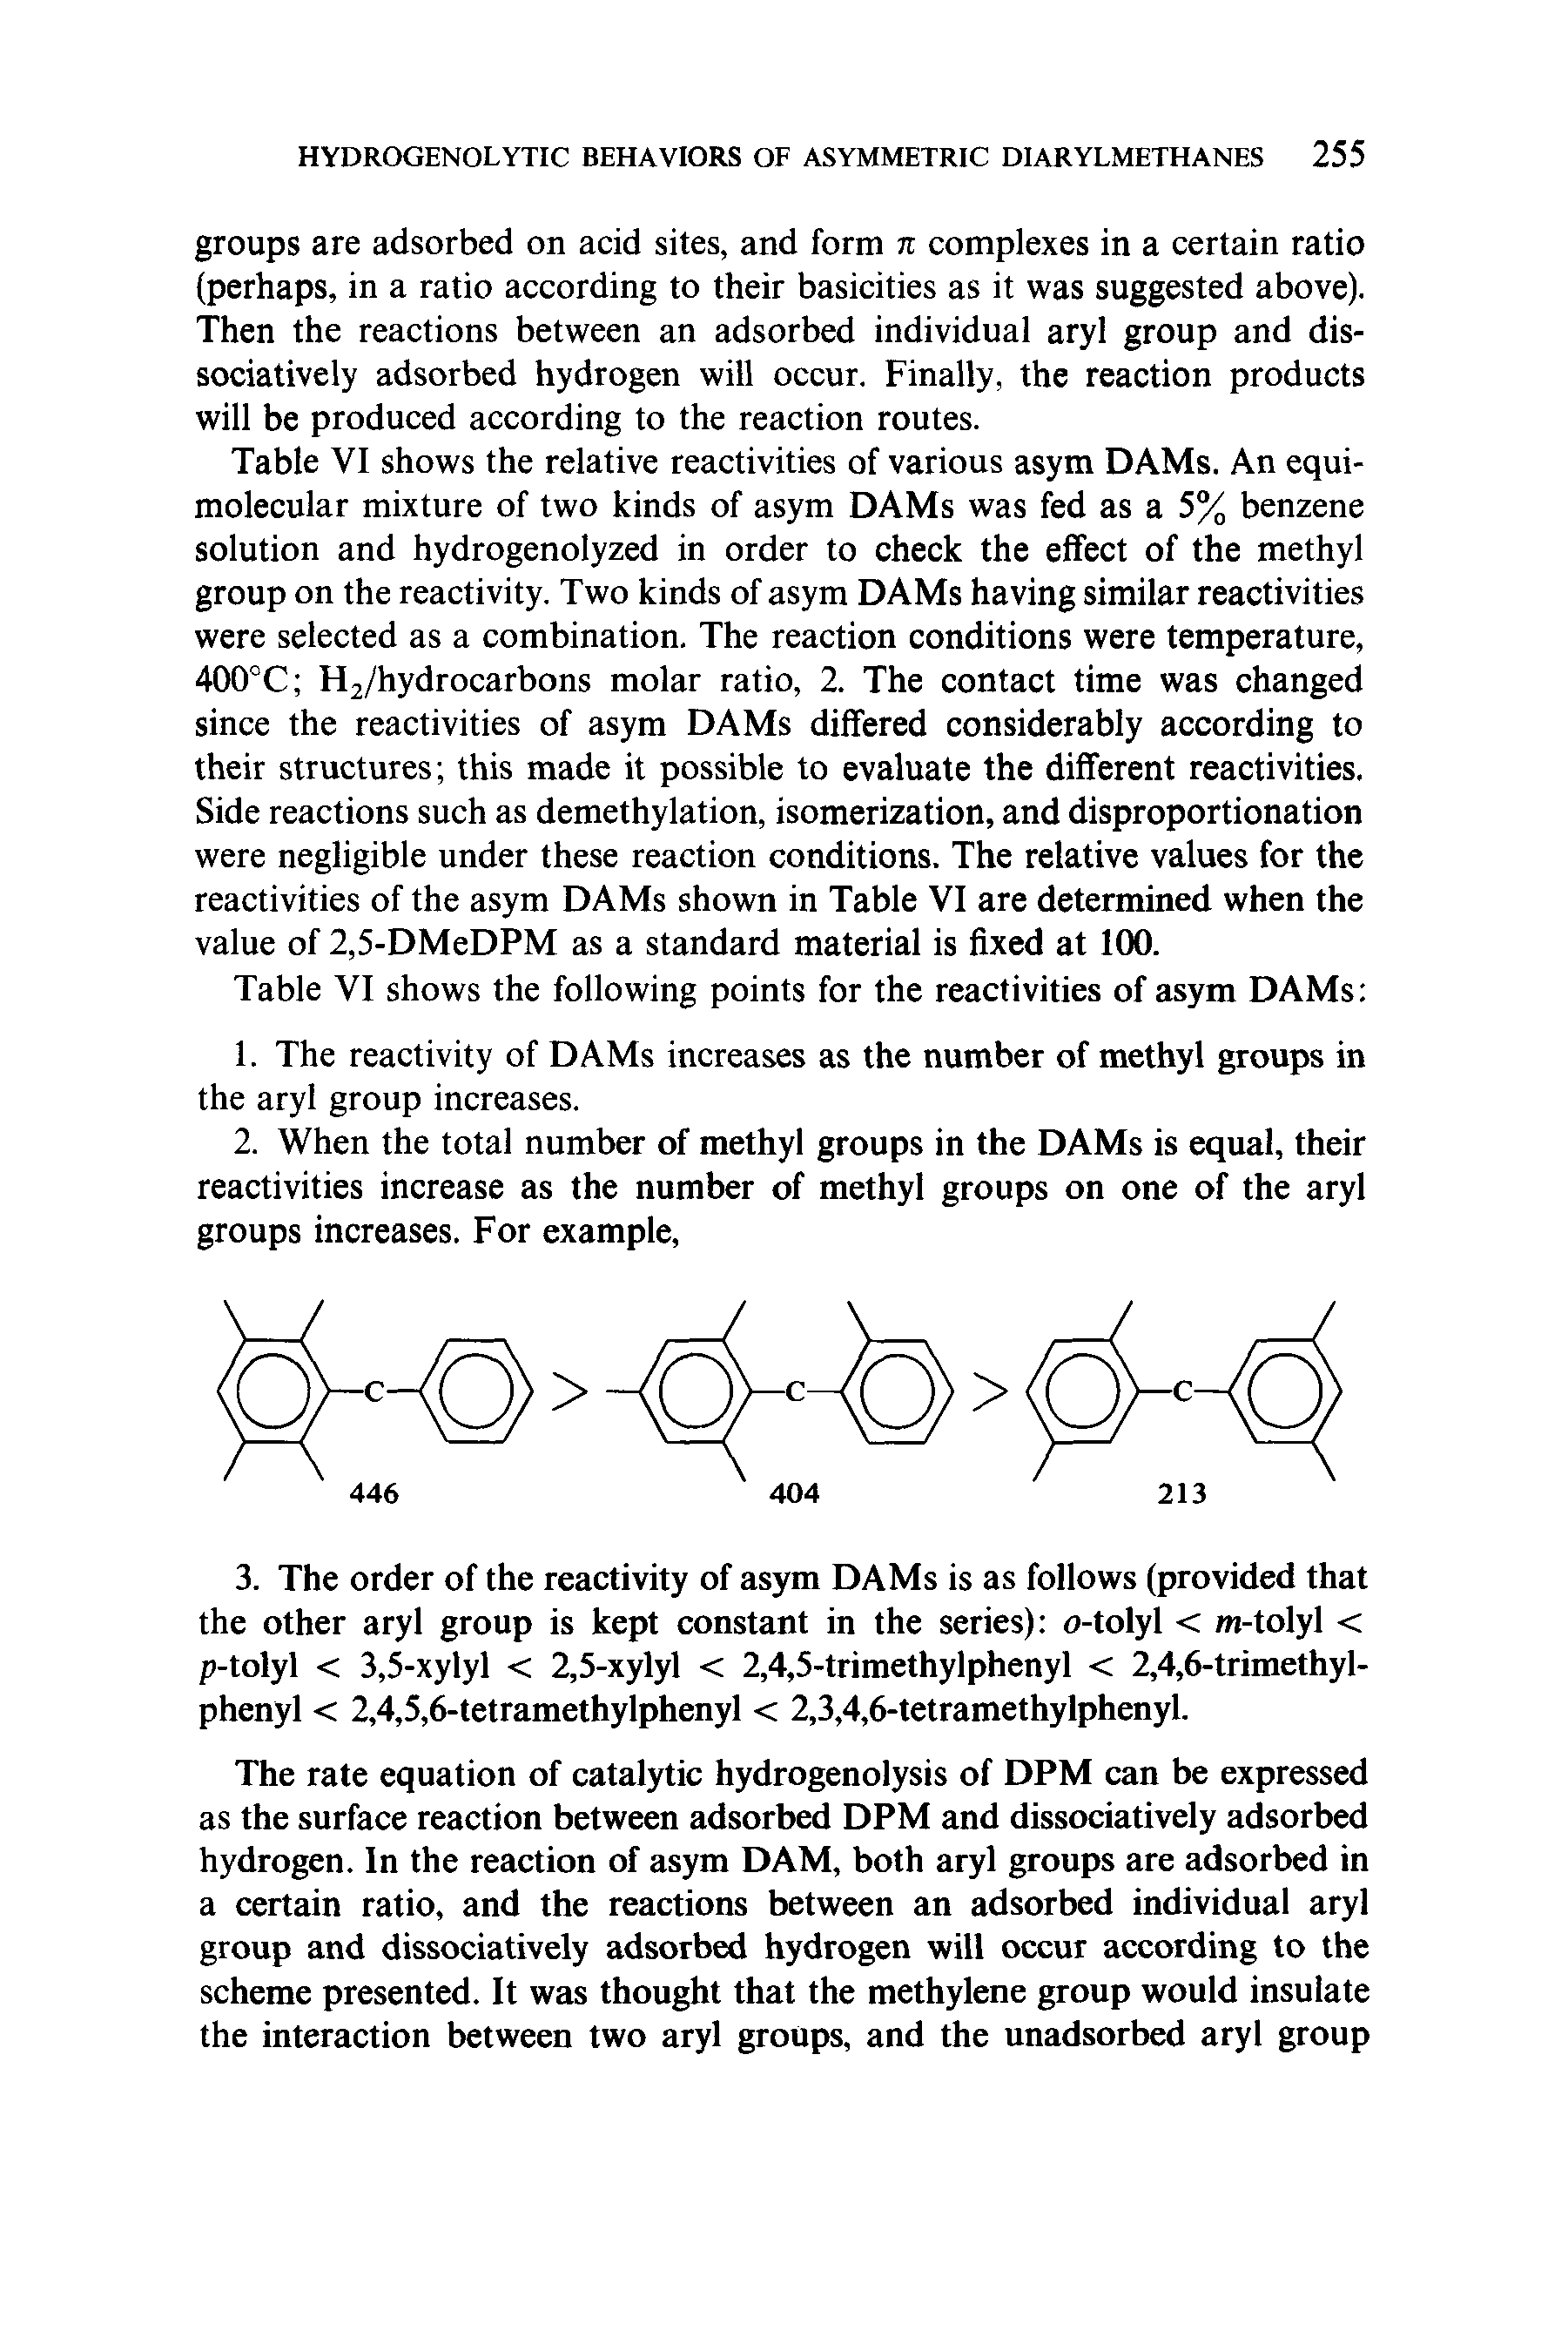 Table VI shows the relative reactivities of various asym DAMs. An equi-molecular mixture of two kinds of asym DAMs was fed as a 5% benzene solution and hydrogenolyzed in order to check the effect of the methyl group on the reactivity. Two kinds of asym DAMs having similar reactivities were selected as a combination. The reaction conditions were temperature, 400°C H2/hydrocarbons molar ratio, 2. The contact time was changed since the reactivities of asym DAMs differed considerably according to their structures this made it possible to evaluate the different reactivities. Side reactions such as demethylation, isomerization, and disproportionation were negligible under these reaction conditions. The relative values for the reactivities of the asym DAMs shown in Table VI are determined when the value of 2,5-DMeDPM as a standard material is fixed at 100.